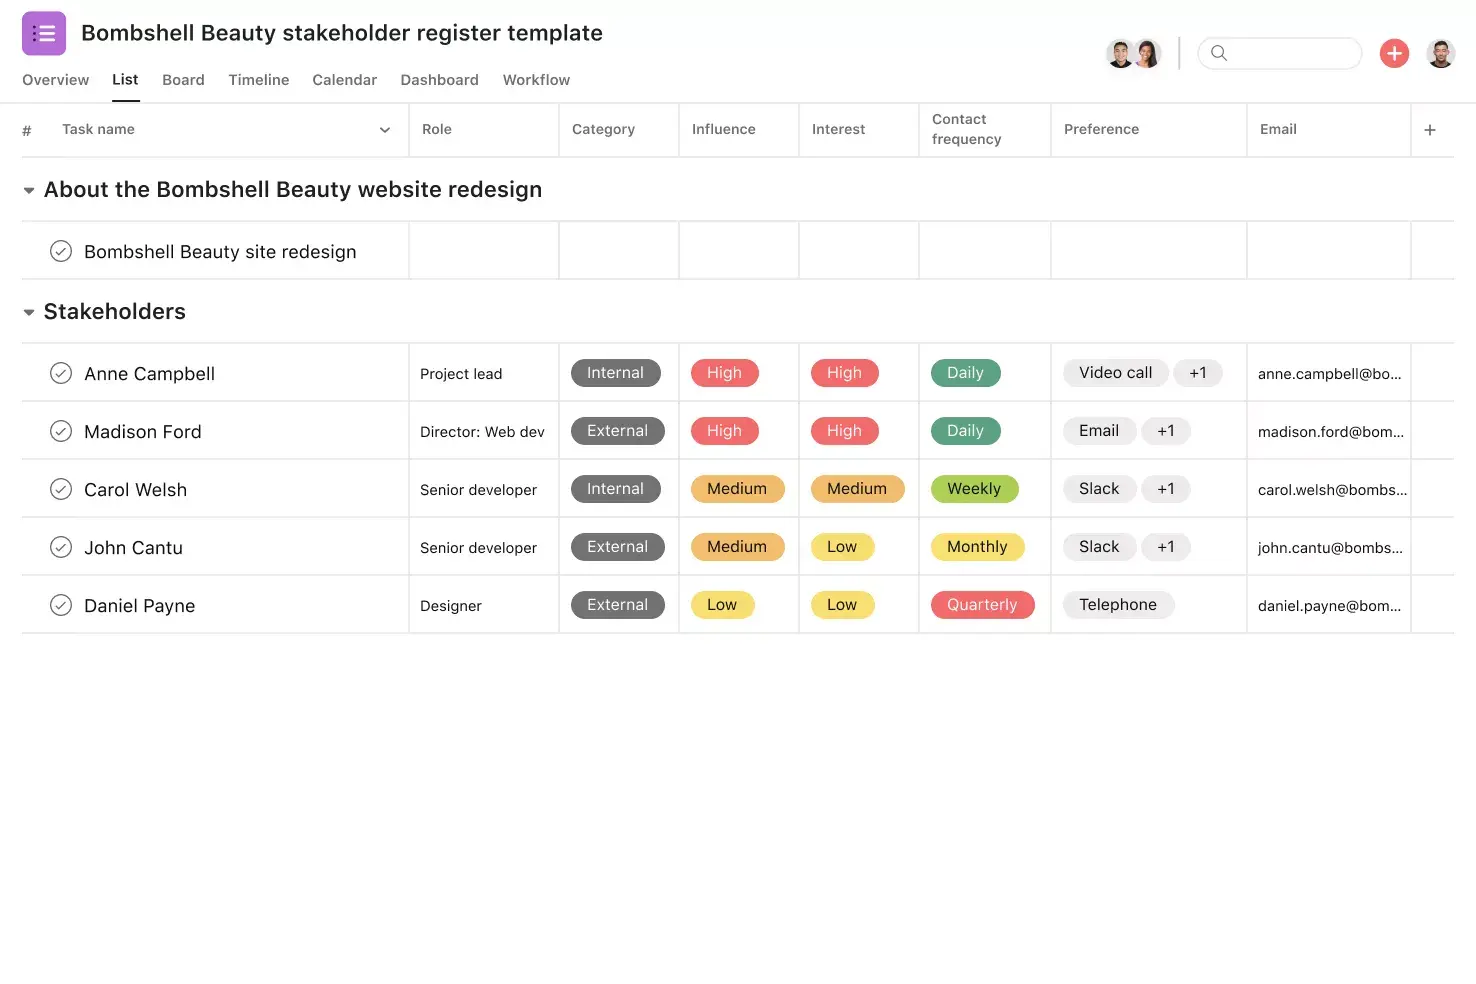 [Product ui] Stakeholder register project in Asana, spreadsheet-style project view (List)